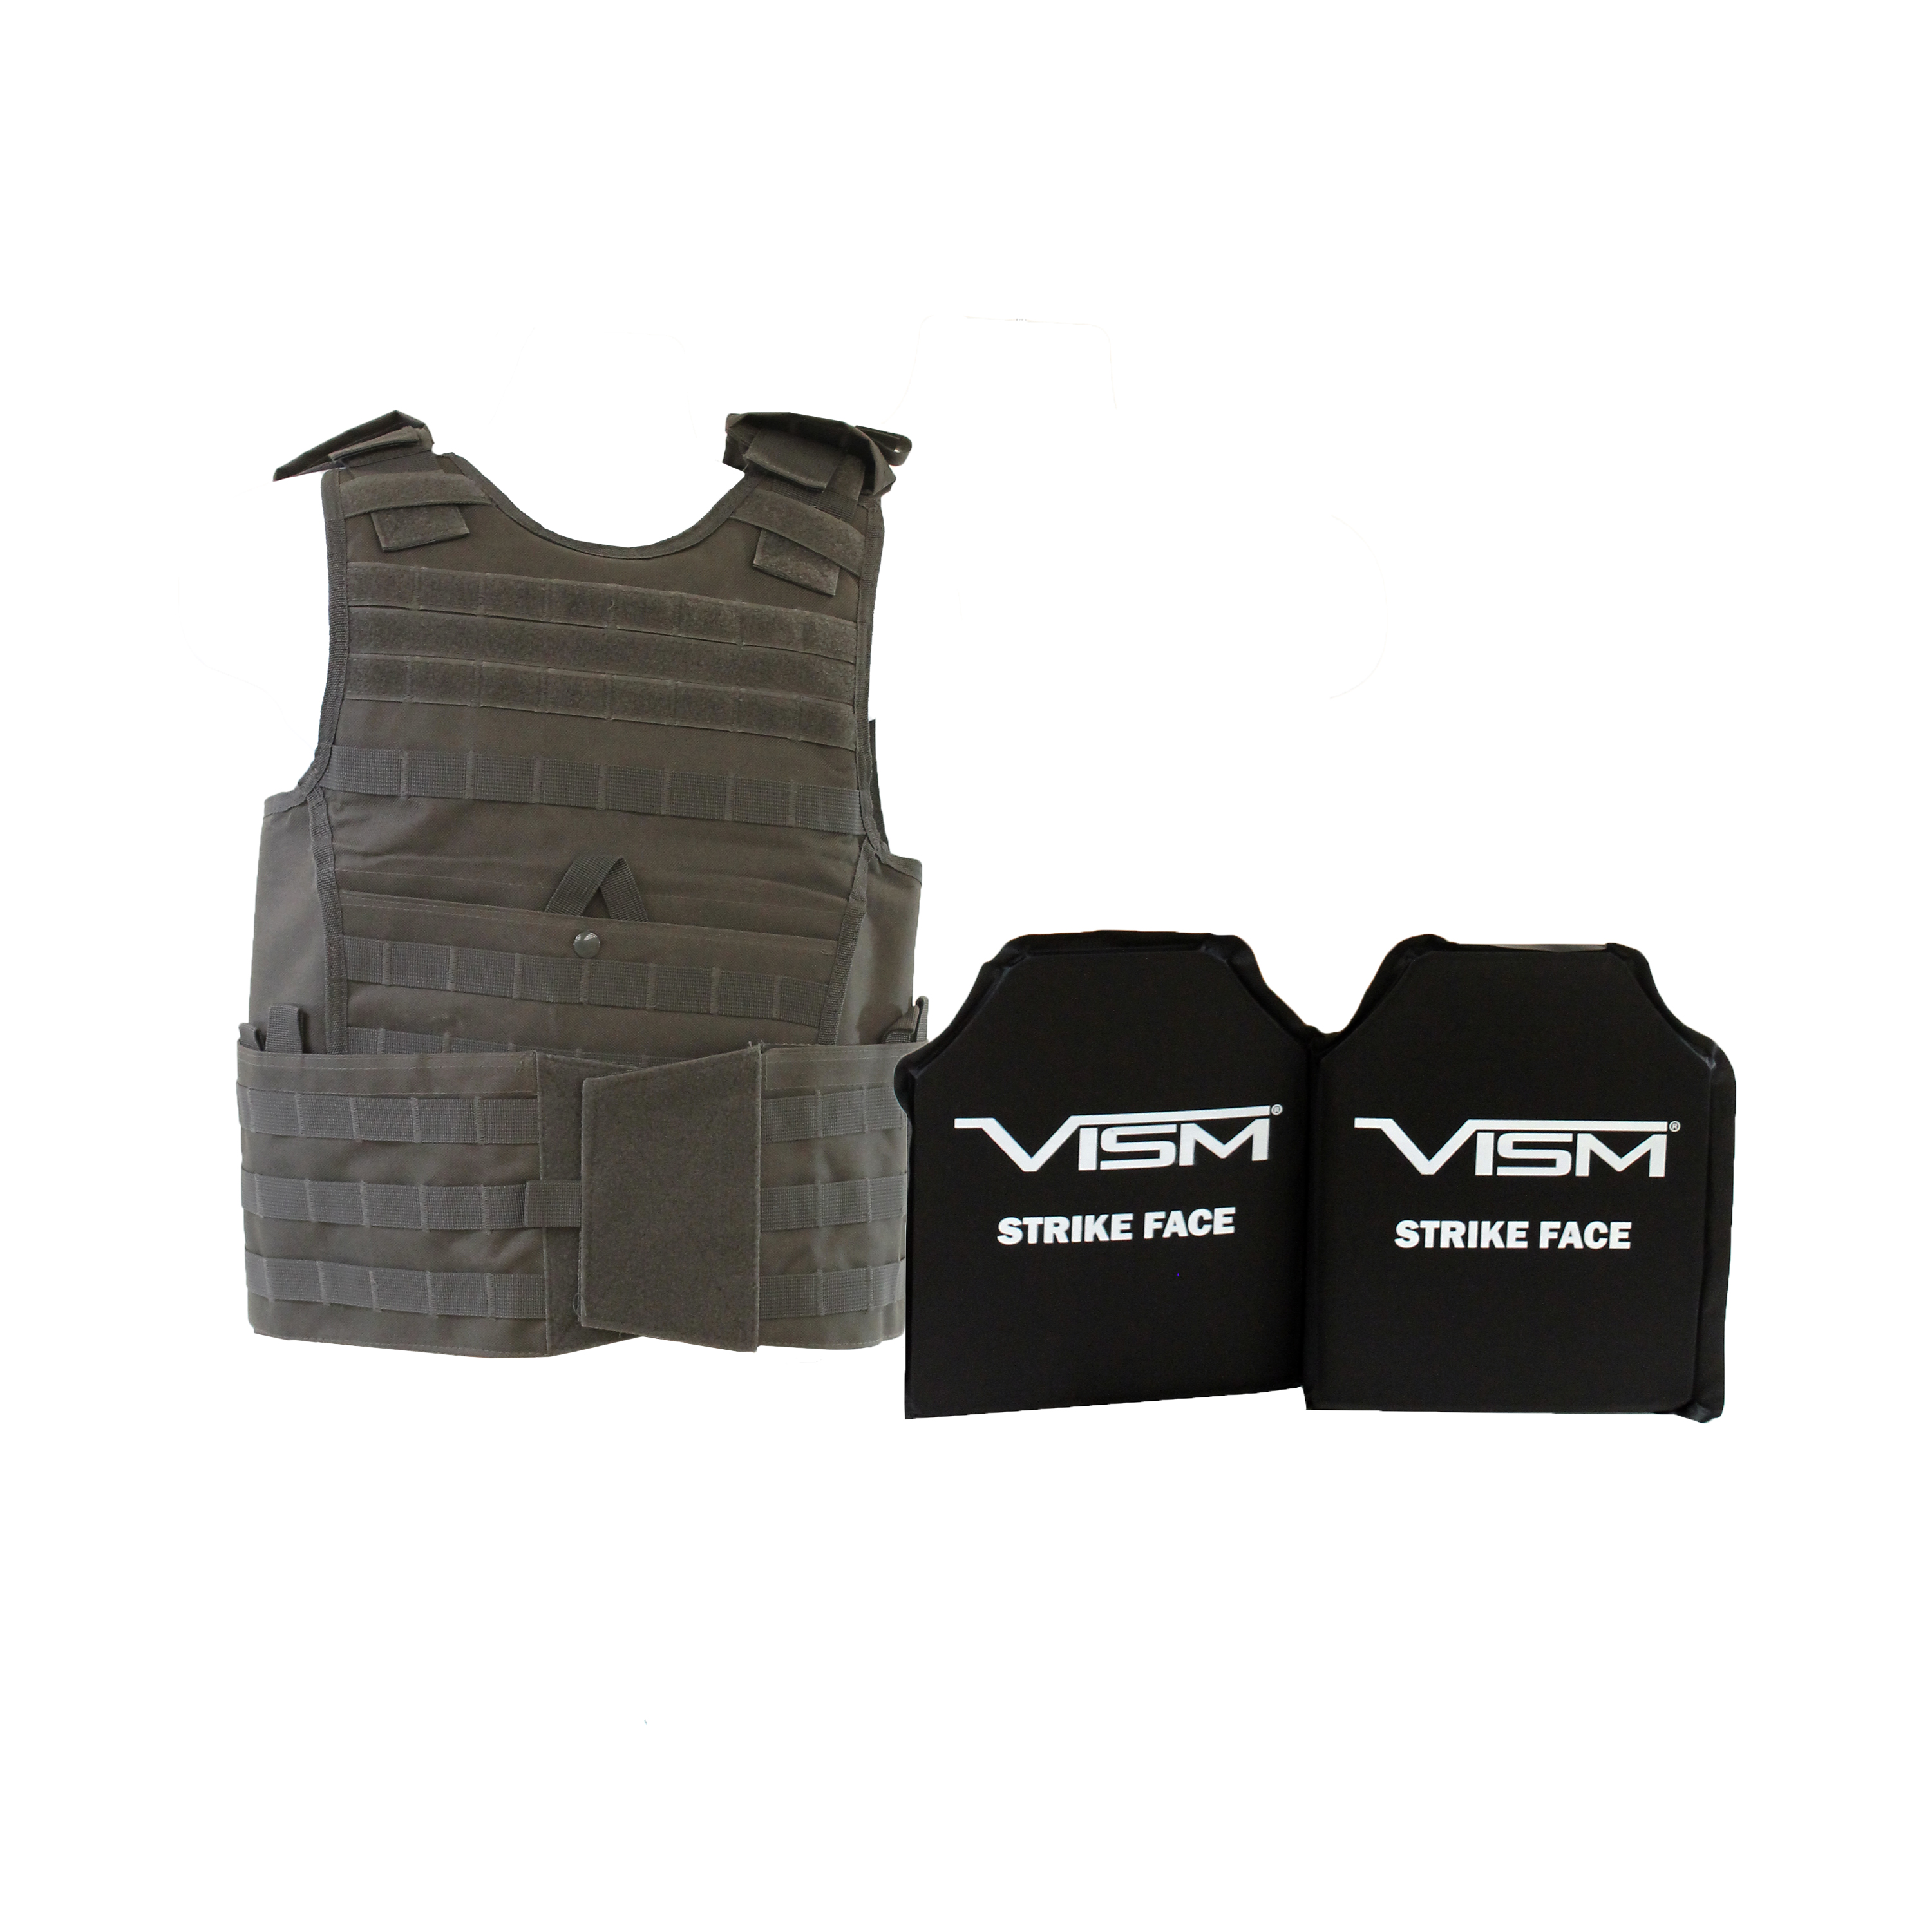 MED-2XL WITH 10"X12' LEVEL IIIA SHOOTERS CUT NcSTAR EXPERT PLATE CARRIER VEST 